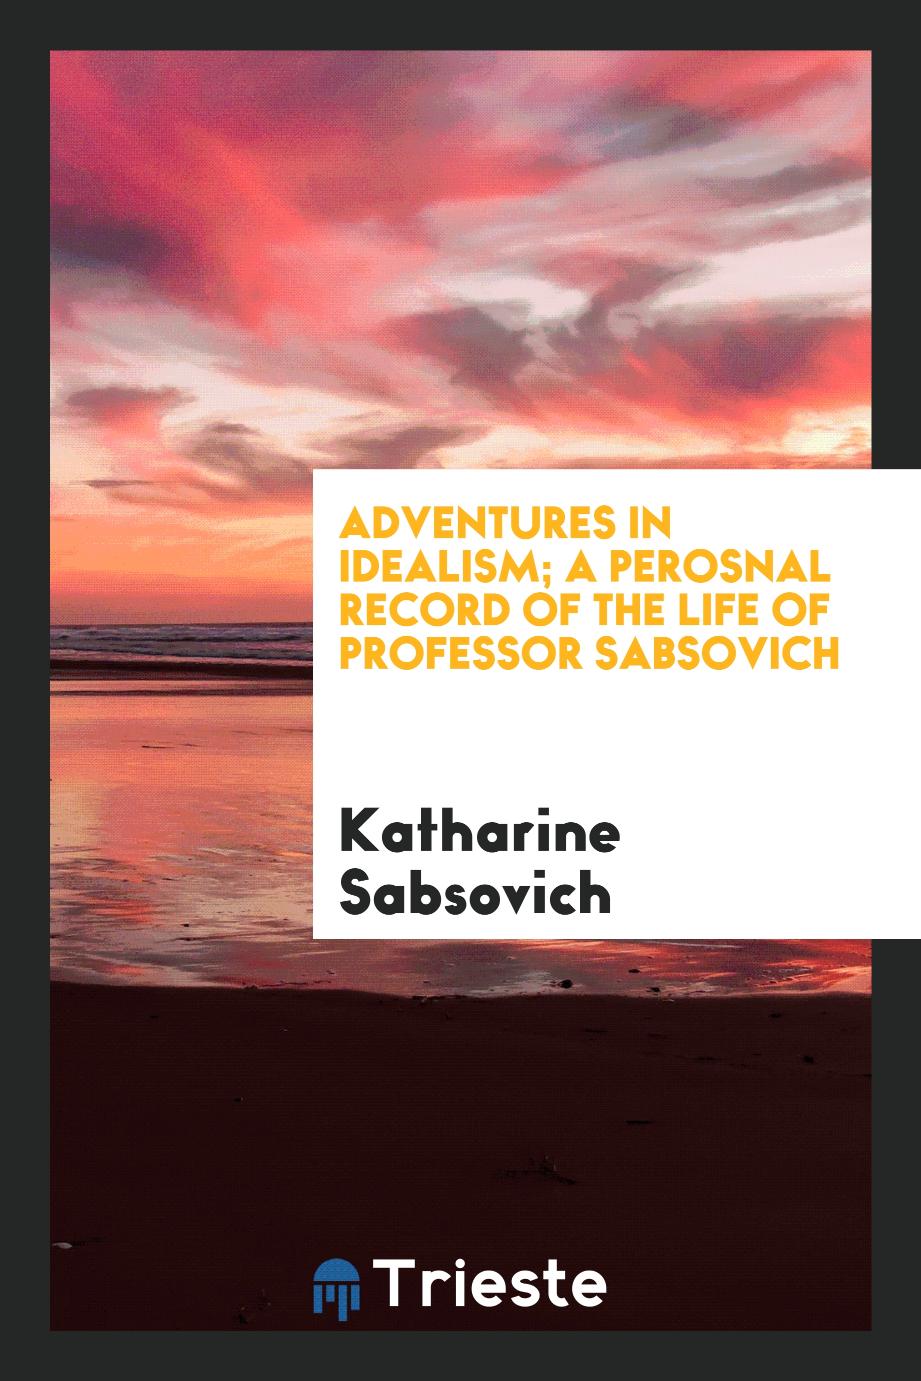 Adventures in idealism; a perosnal record of the life of Professor Sabsovich